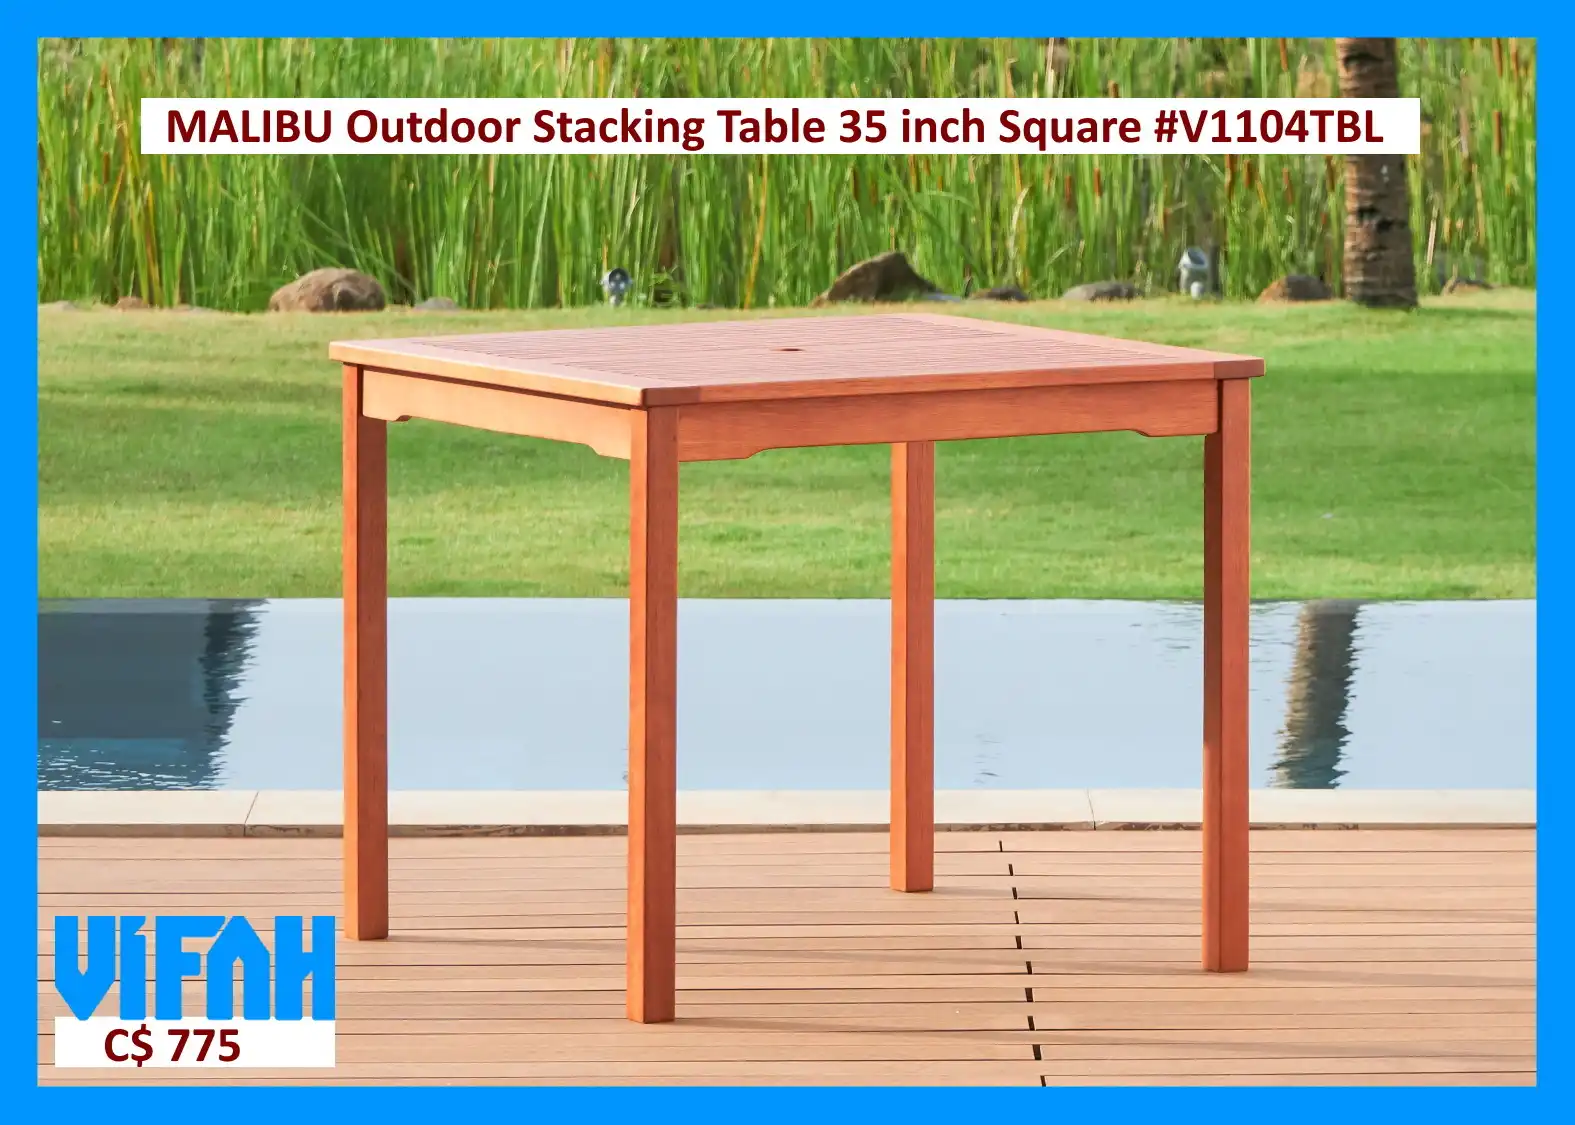 MALIBU Outdoor #V1104TBL Stacking Table 35 inch Square